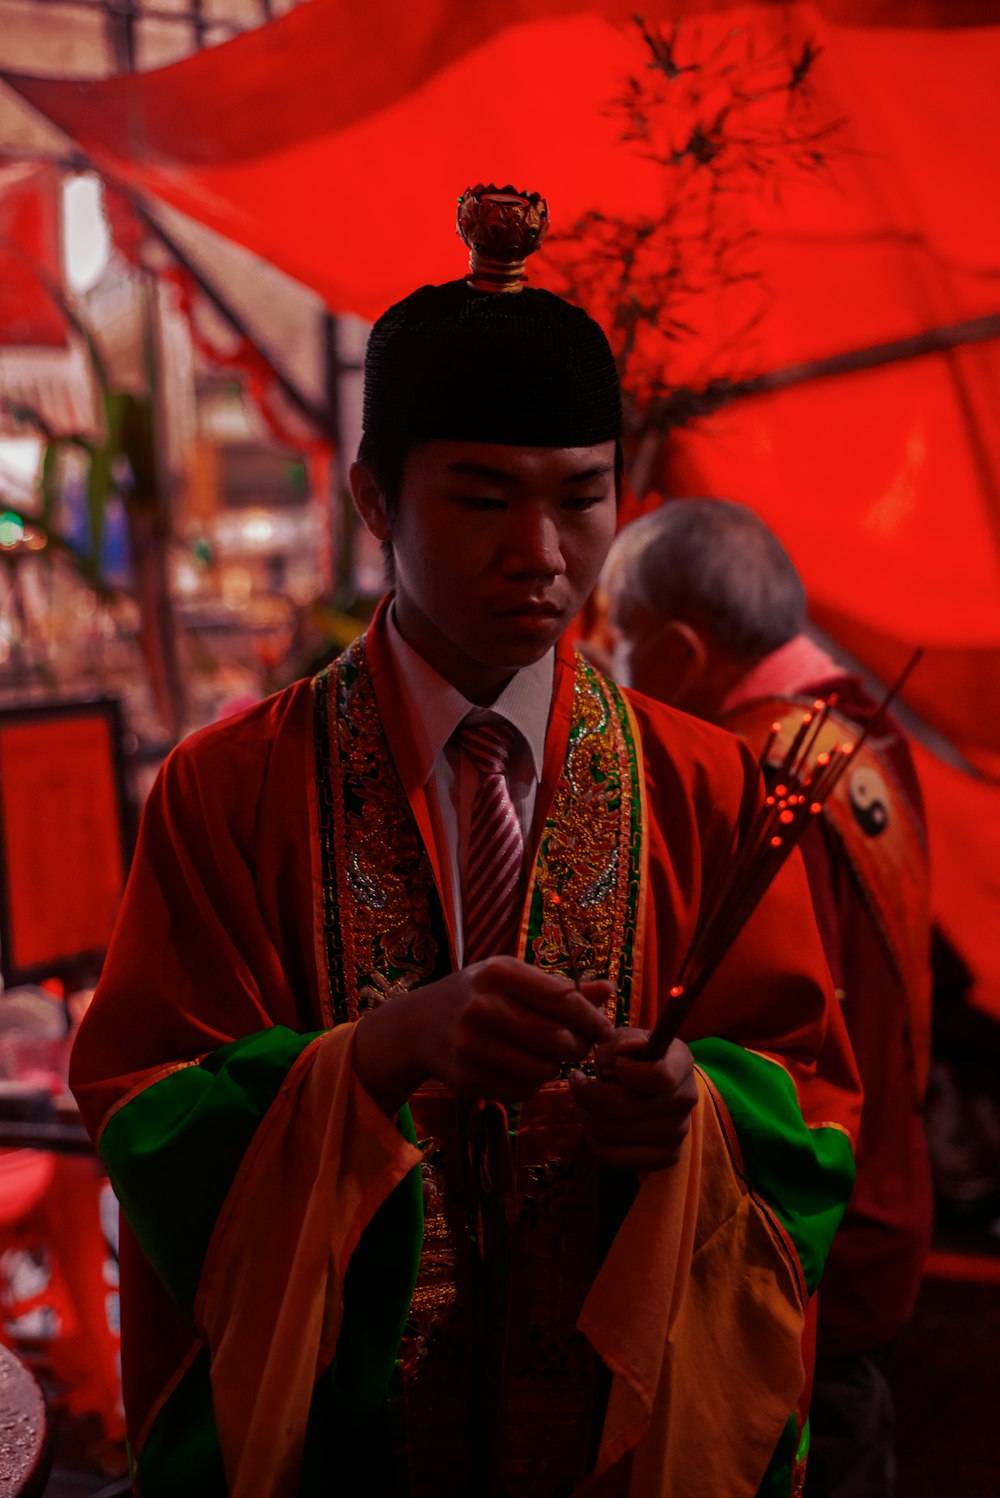 a man in a red and green outfit looking at his cell phone